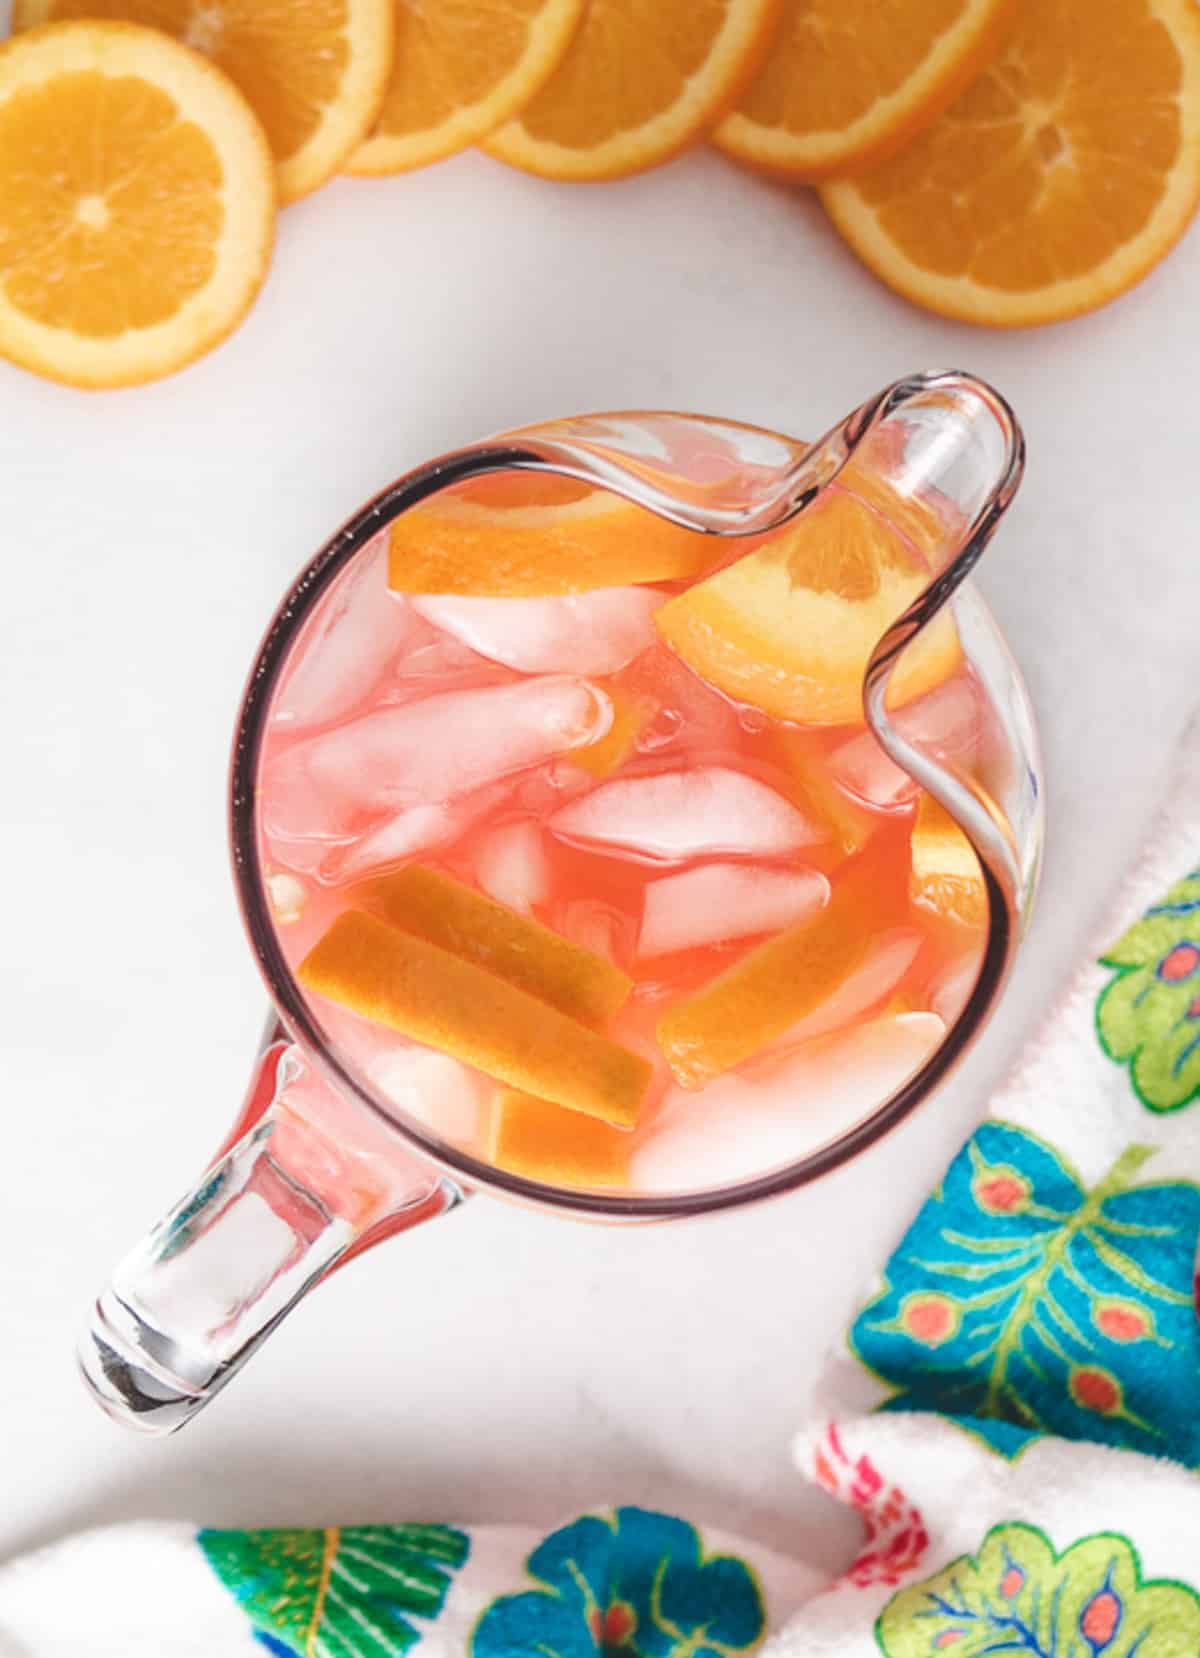 Vodka Soda Party Punch - Crazy for Crust